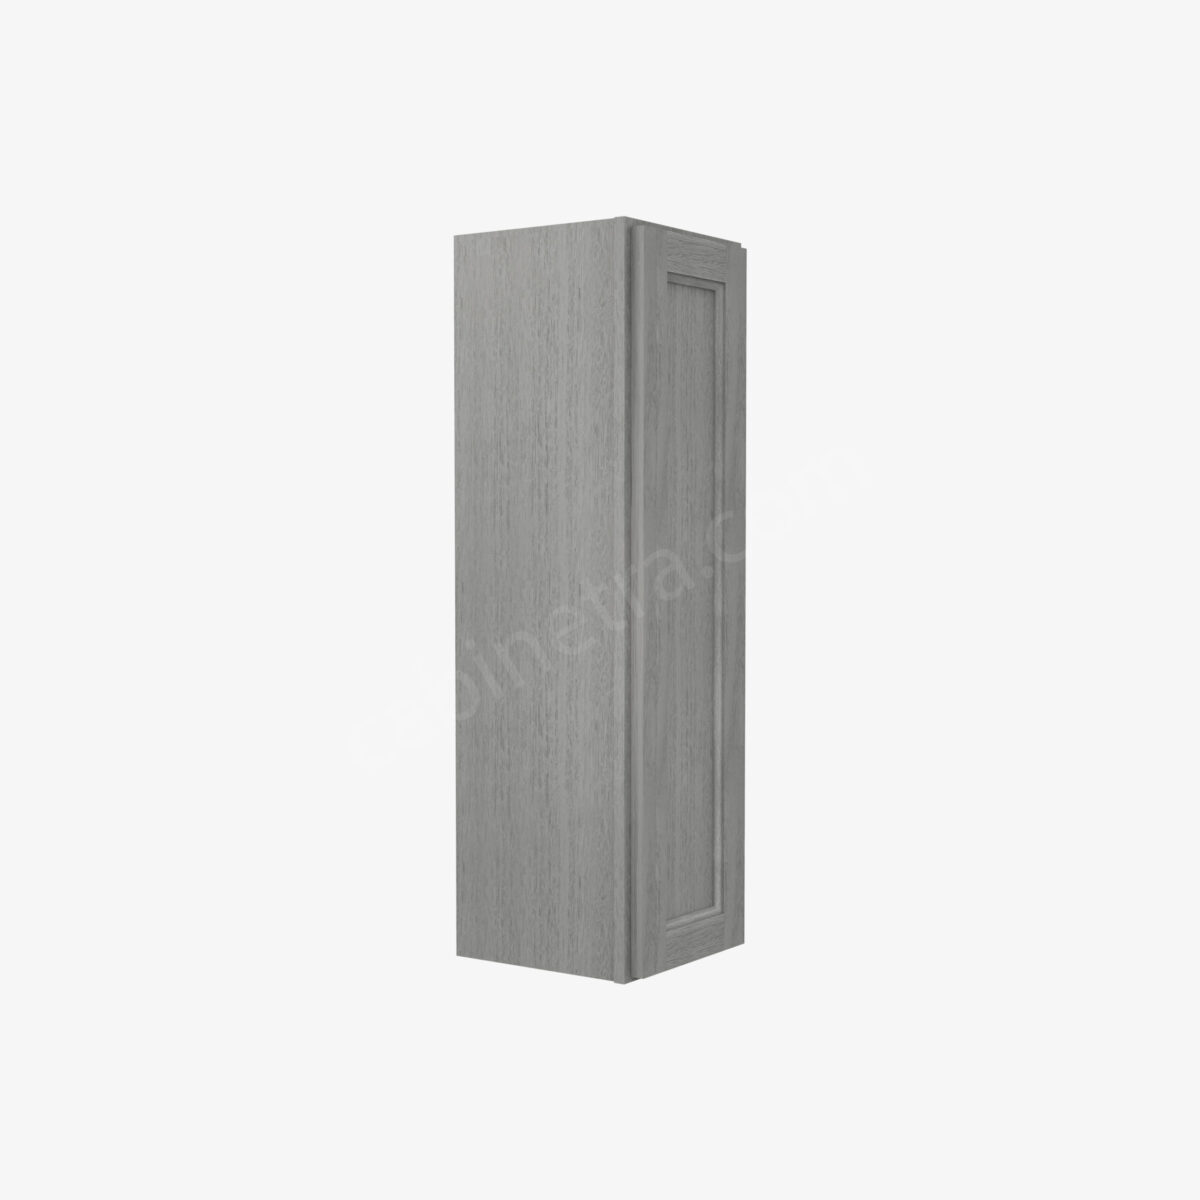 TG W1242 4 Forevermark Midtown Grey Cabinetra scaled